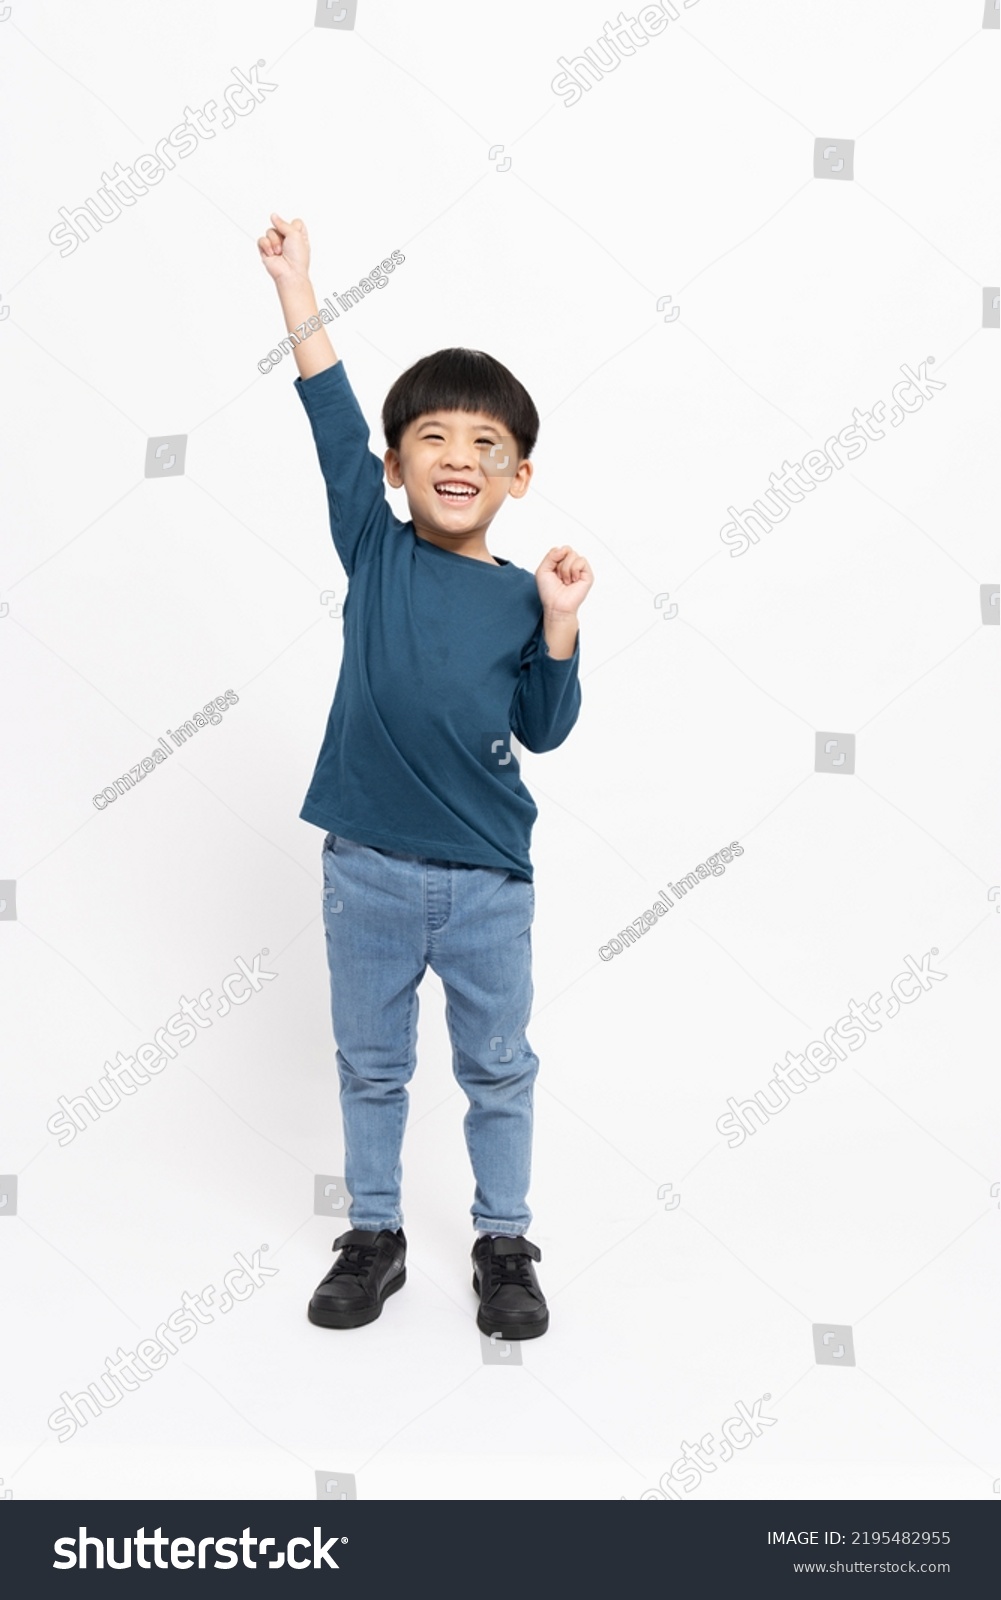 Happy Asian little boy hands up raised arms from happiness isolated on white background, Excited kid winner success concept, Looking at camera and full body composition #2195482955